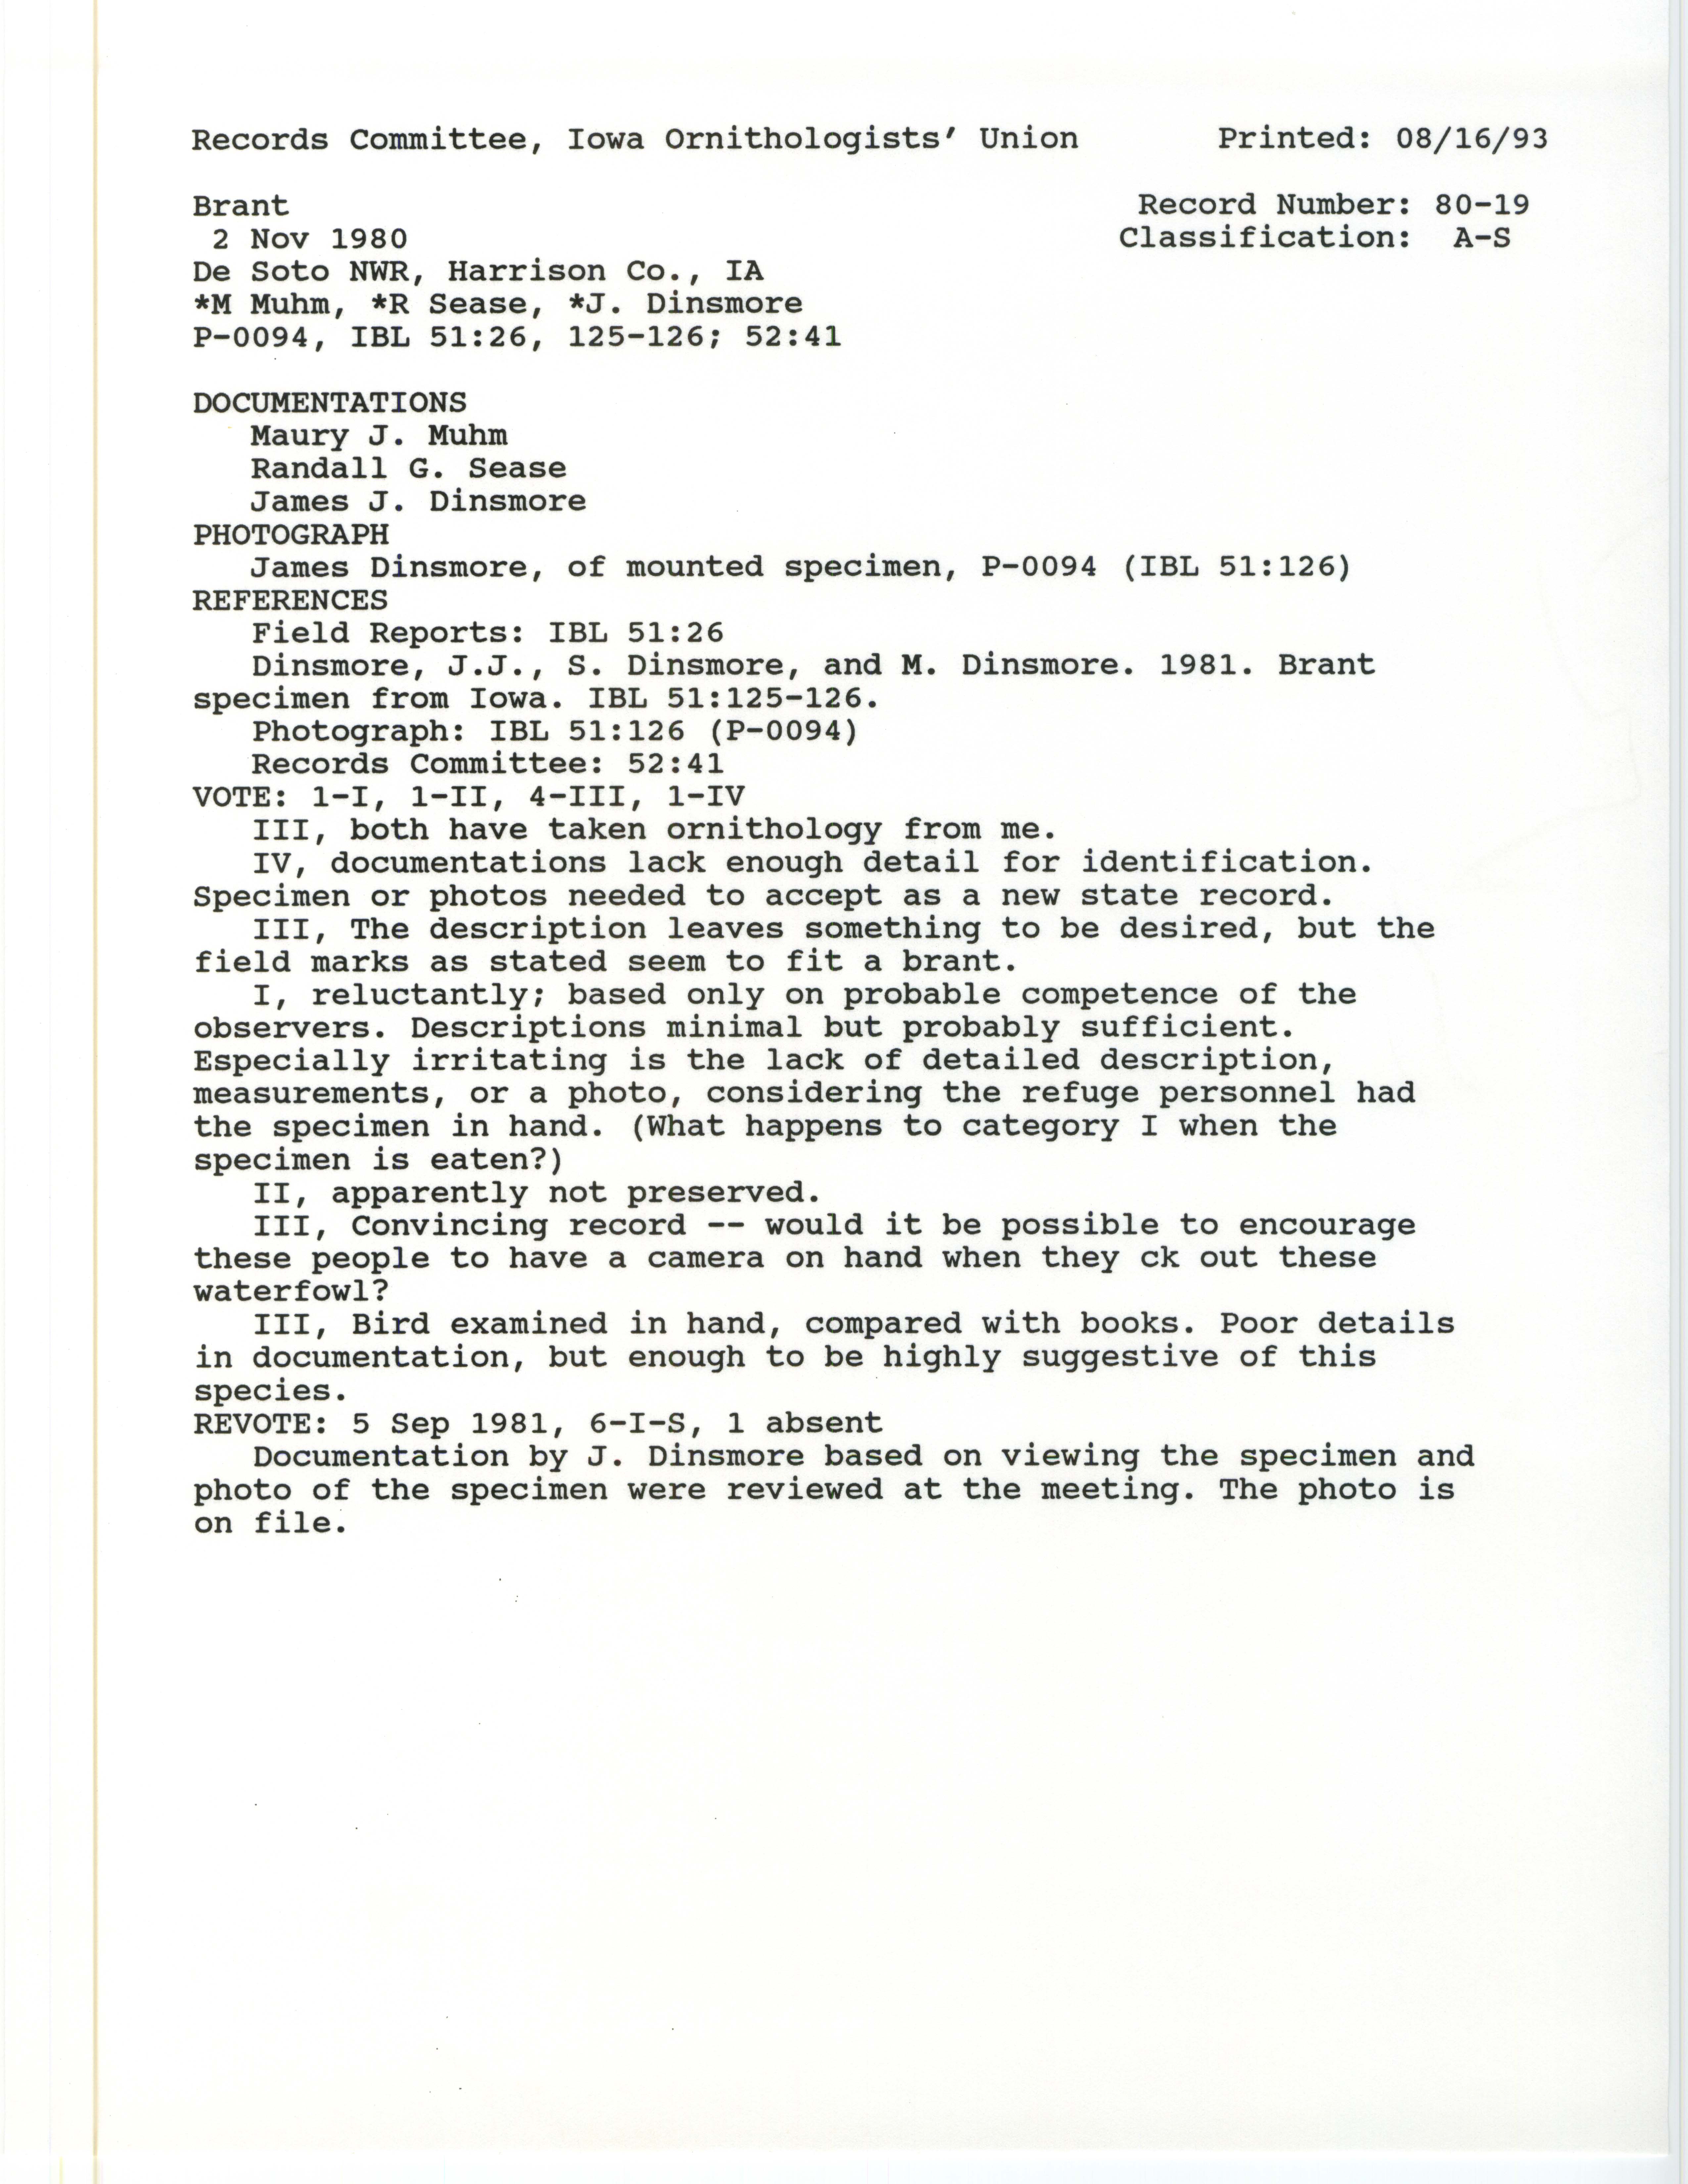 Records Committee review for rare bird sighting of Brant at De Soto National Wildlife Refuge, 1980